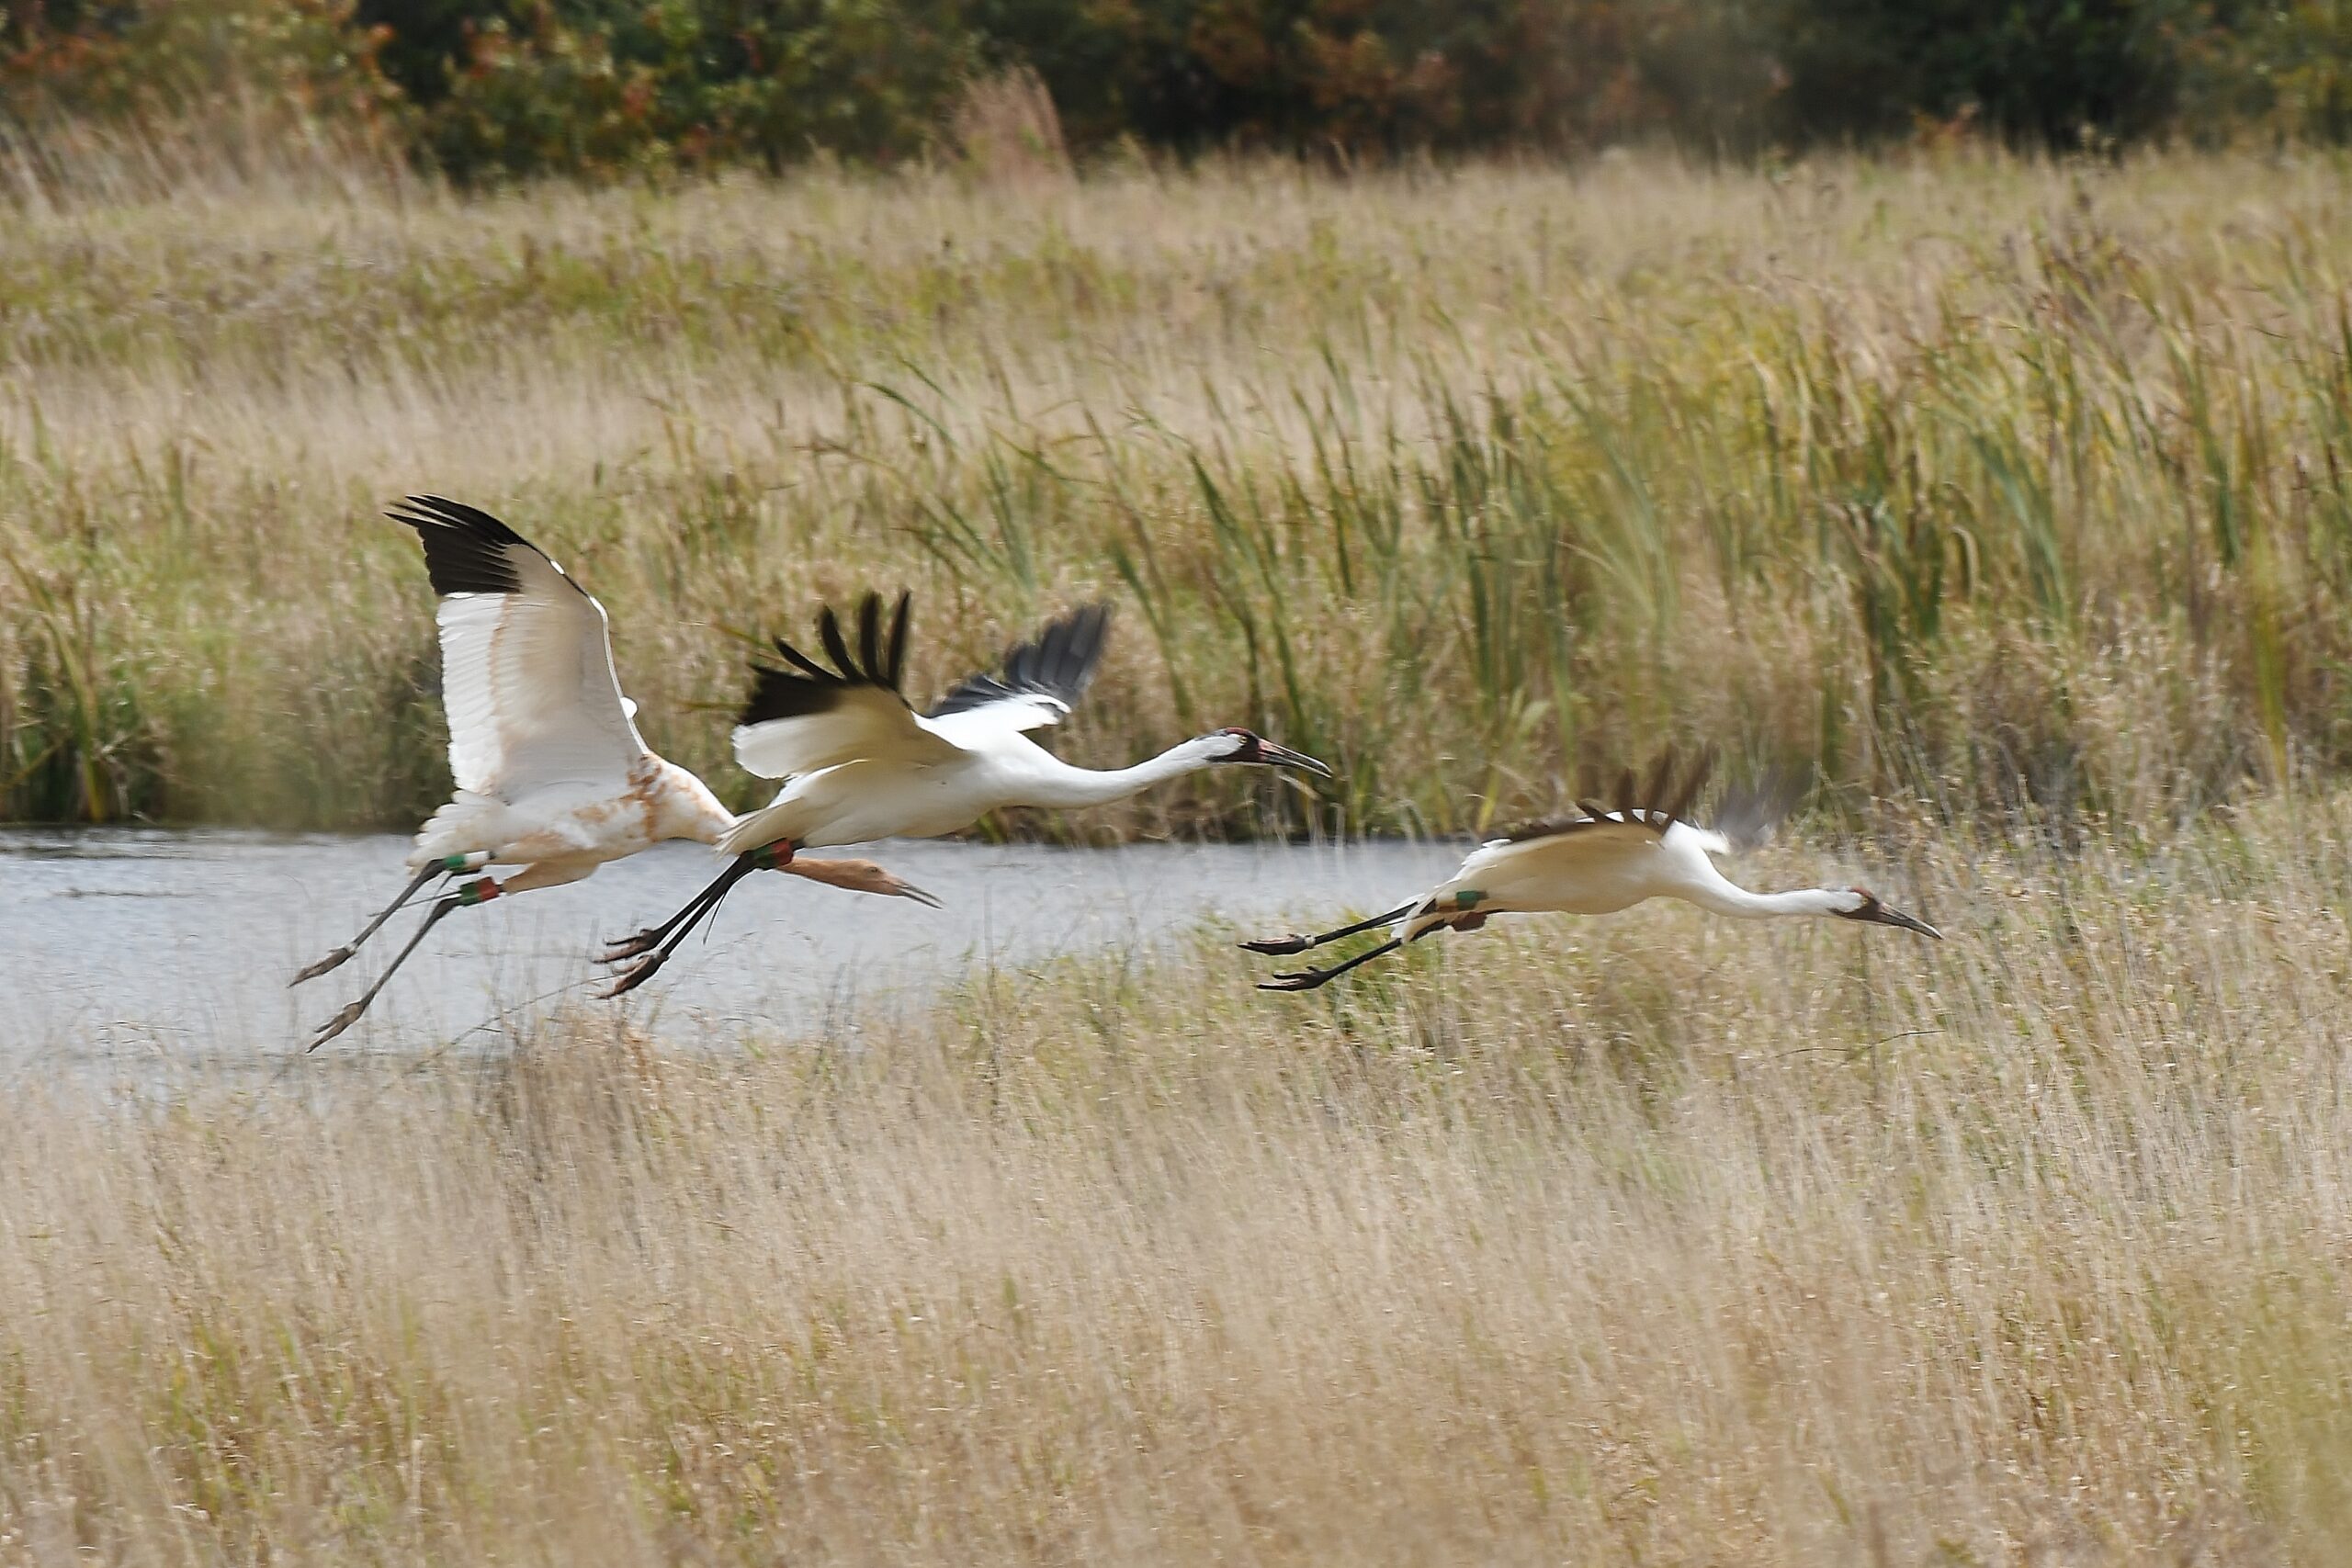 Two adult cranes and one juvenile whooping crane flying over a marsh